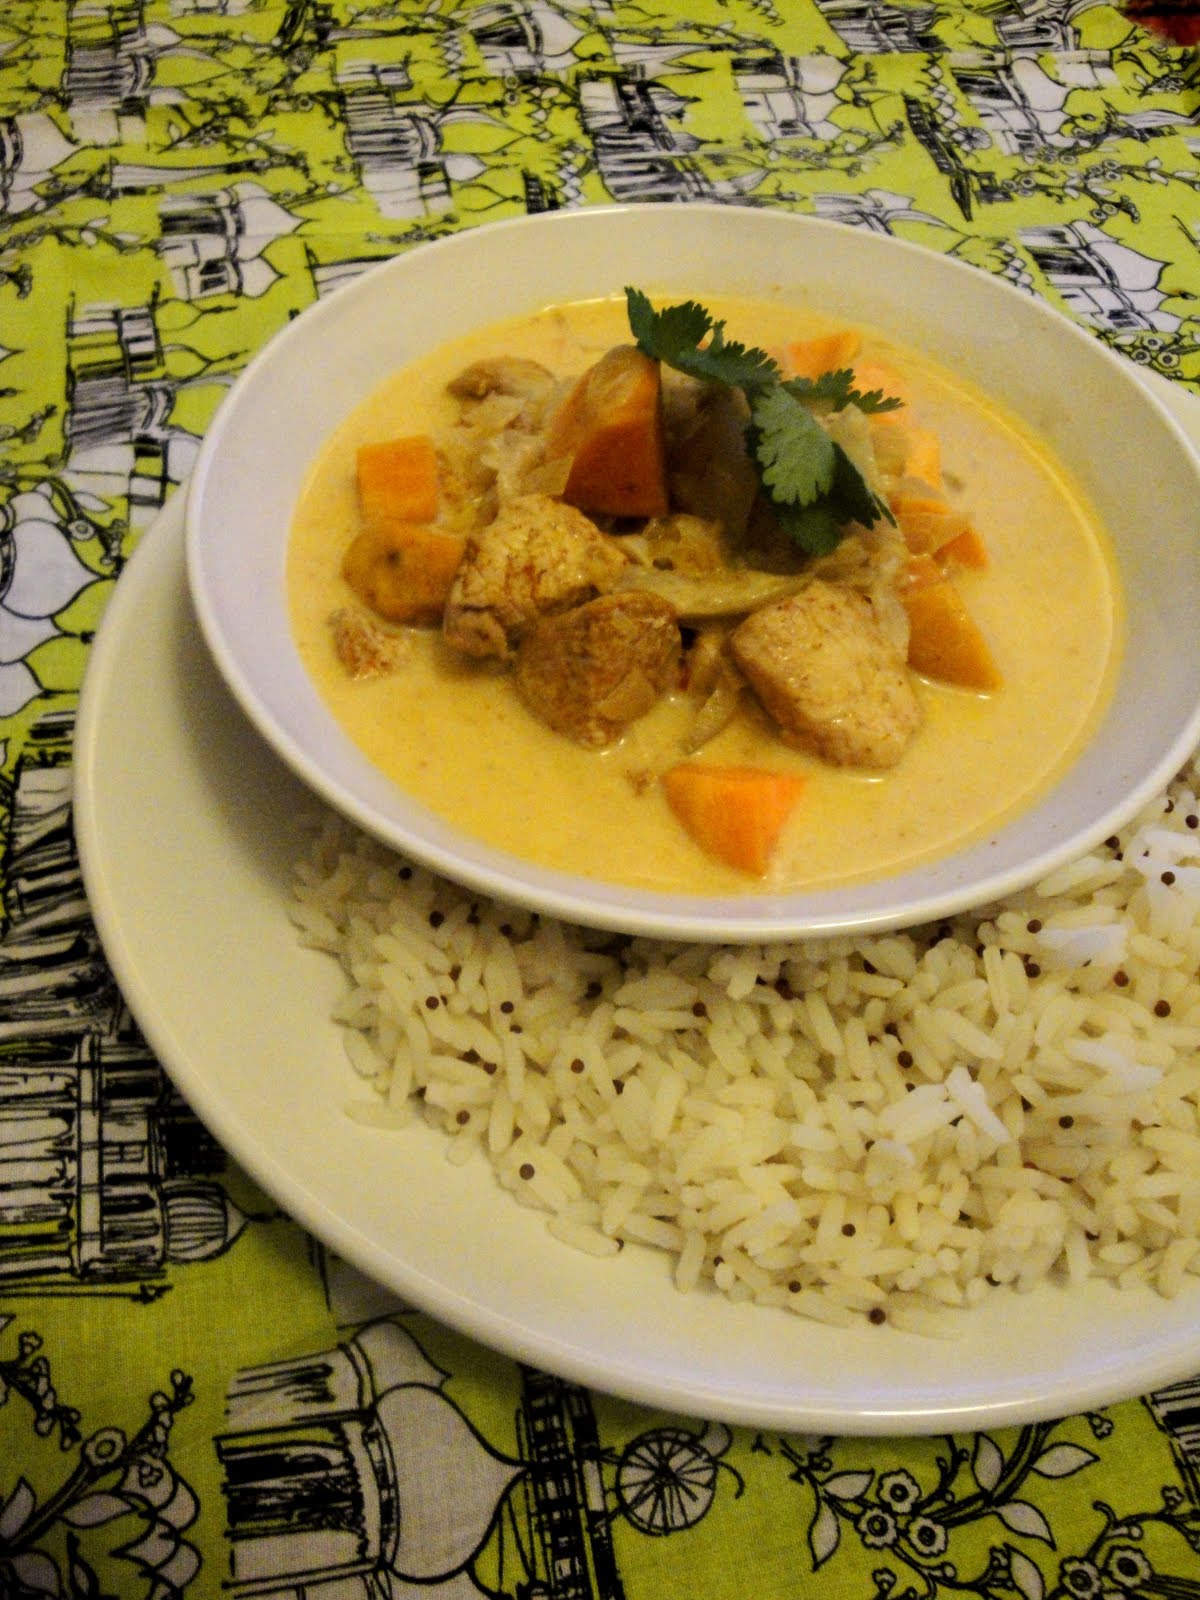 Culinary Conquests: Vietnamese Chicken and Sweet Potato Curry